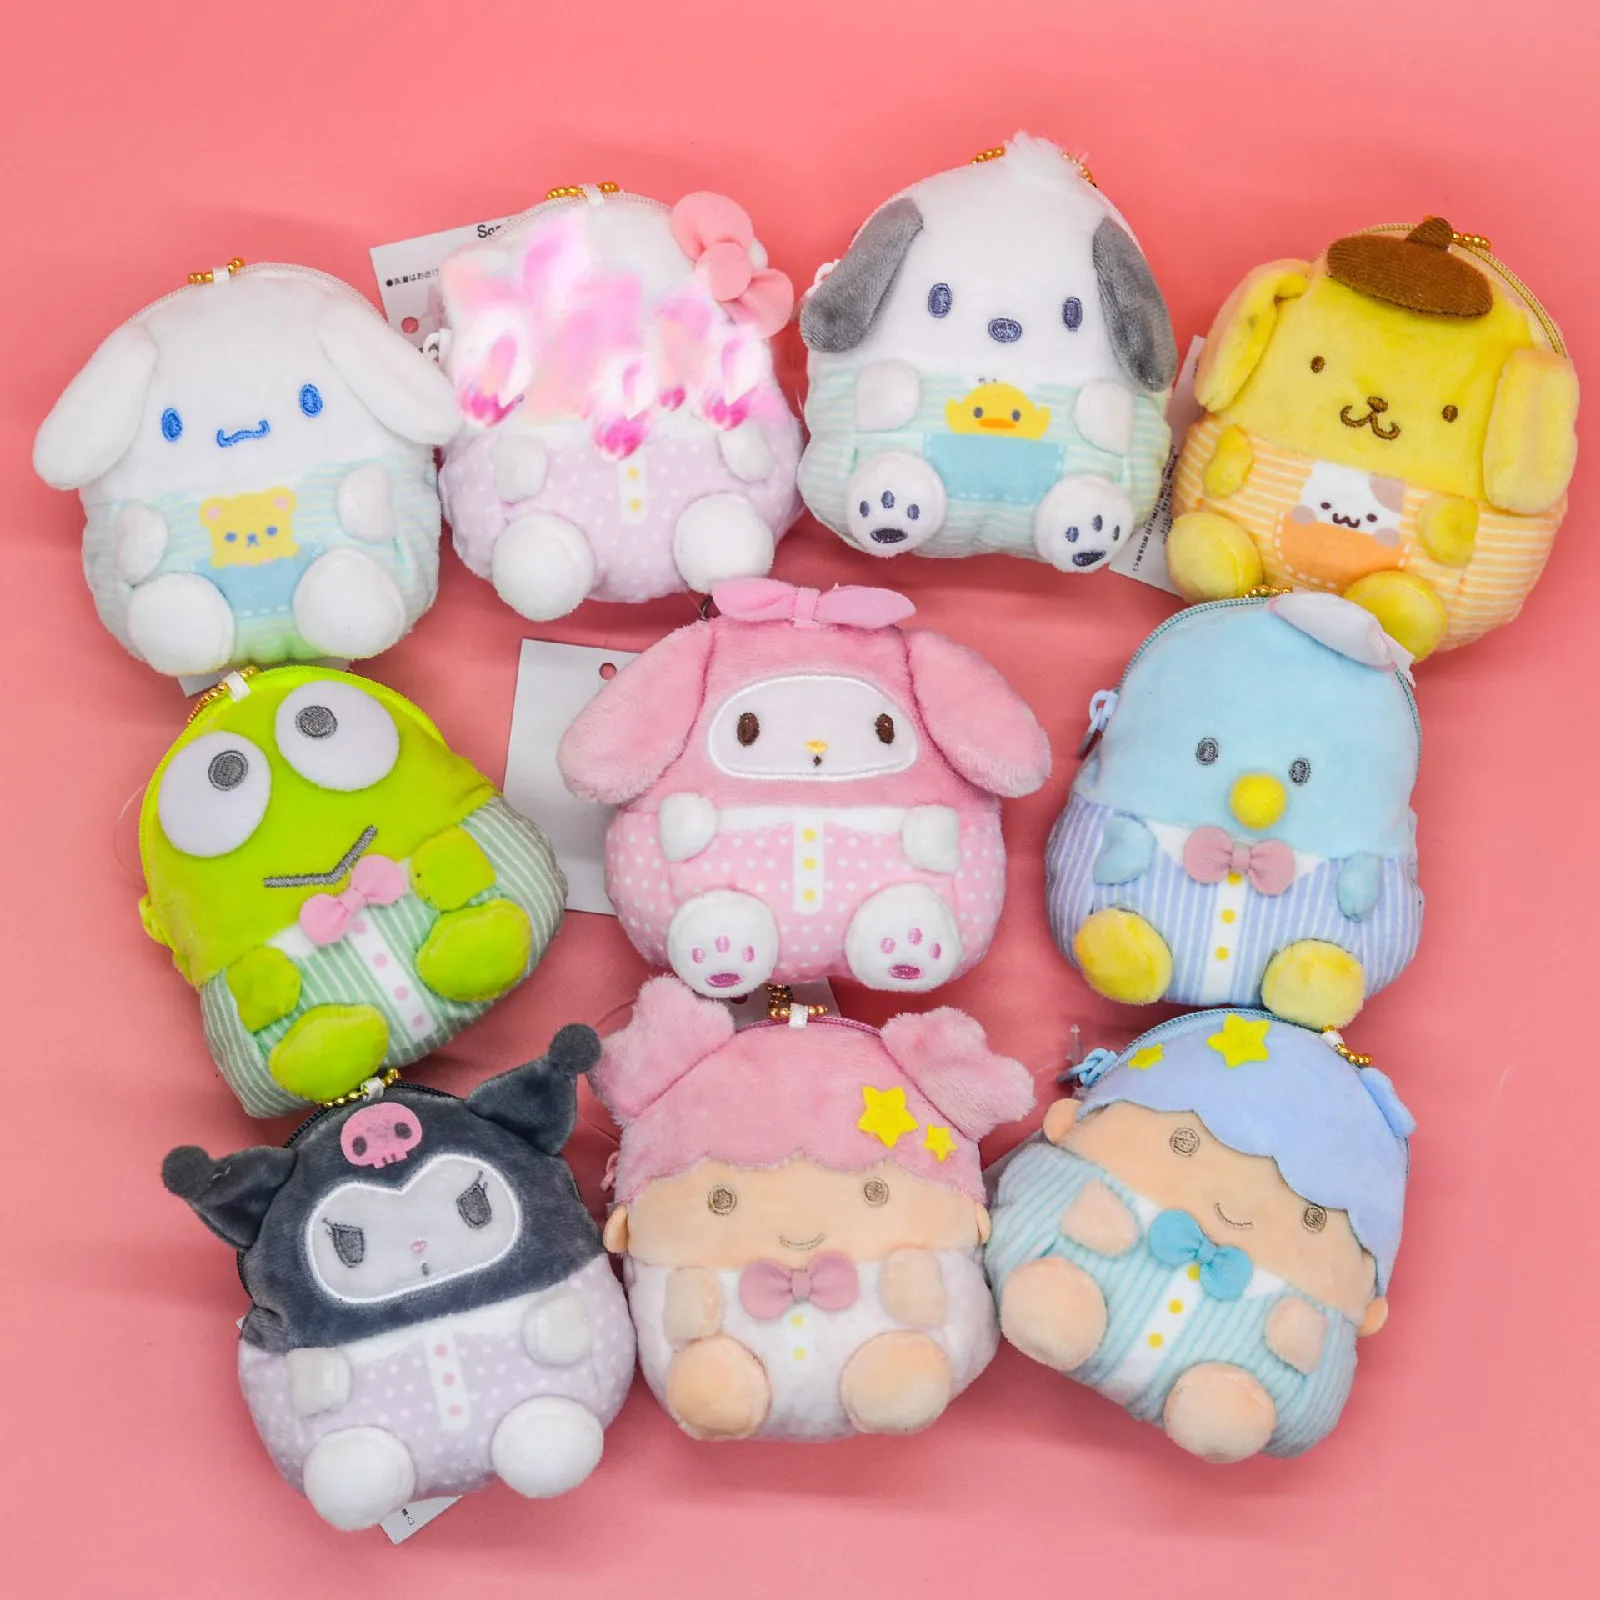 1pcs 9cm Sanrio Cute Anime Cartoon Plush Toys My Melody Animal Crossing Dolls Soft Kity Cat Coin Pure Pendant for Girls Gifts